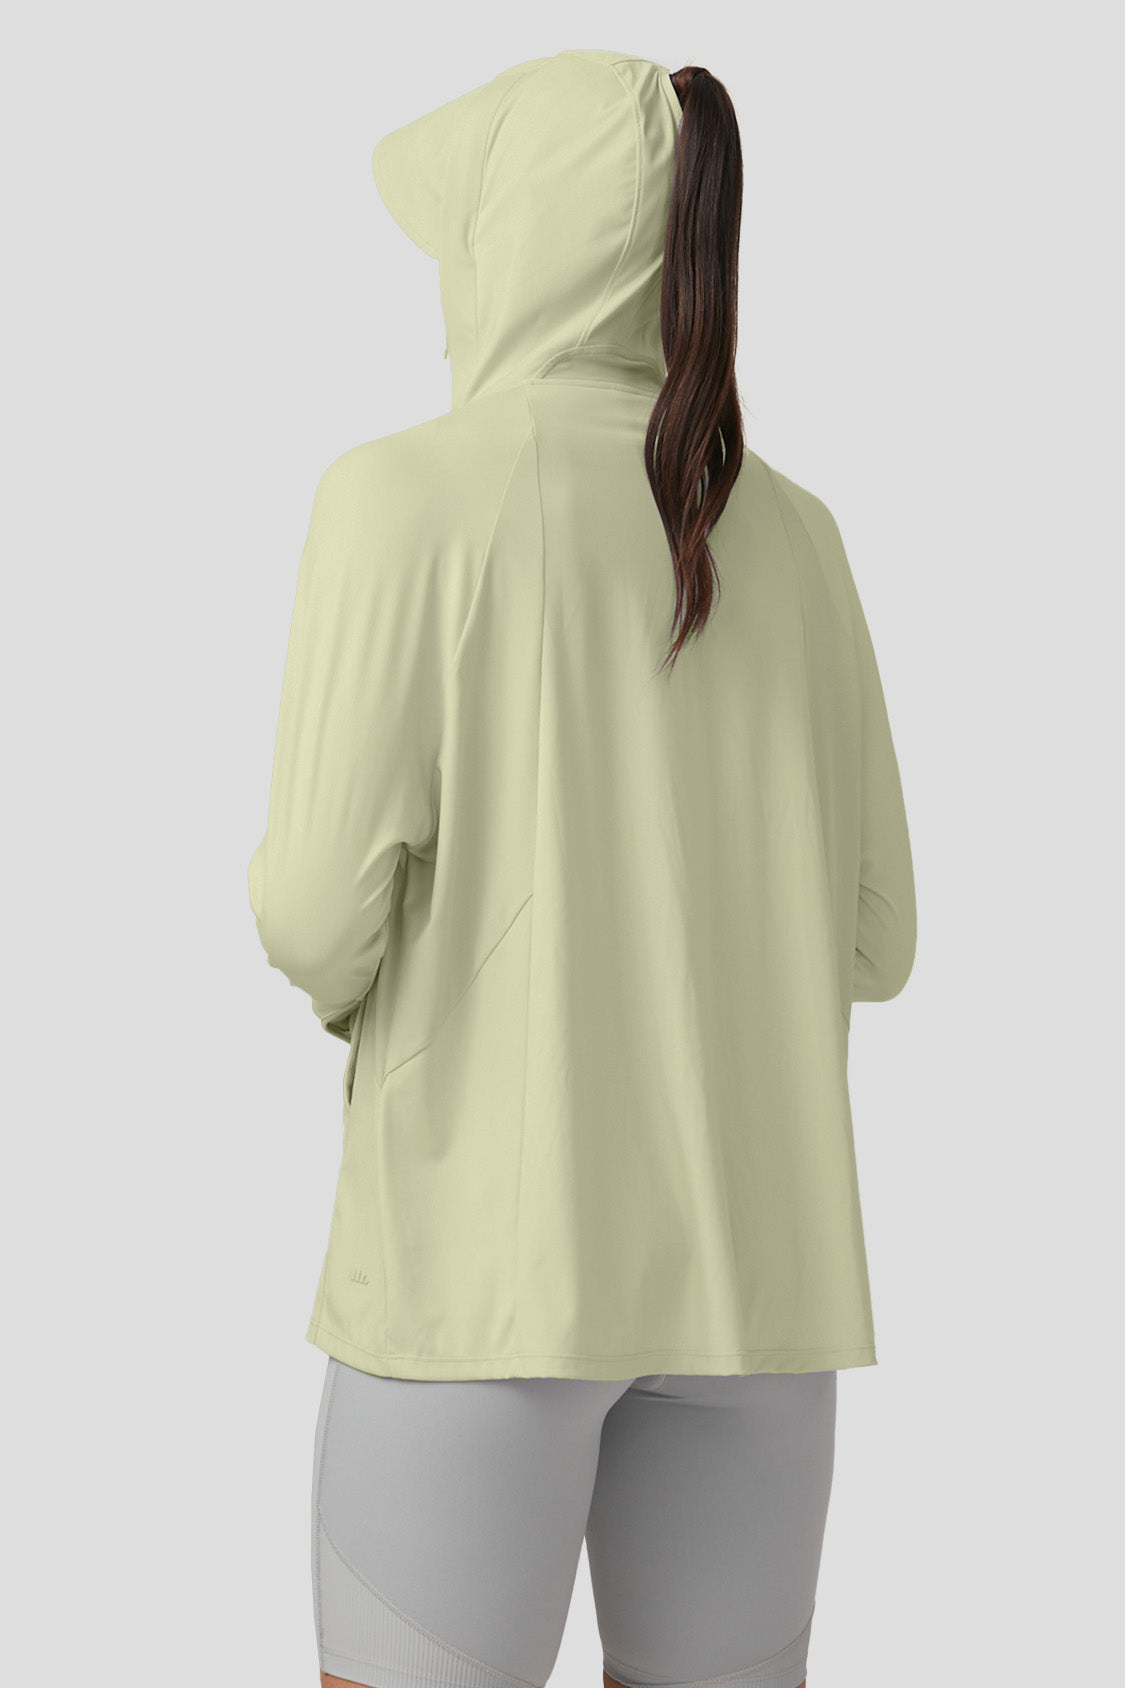 beneunder cooling uv sun protection jacket hoodie #color_pearl green